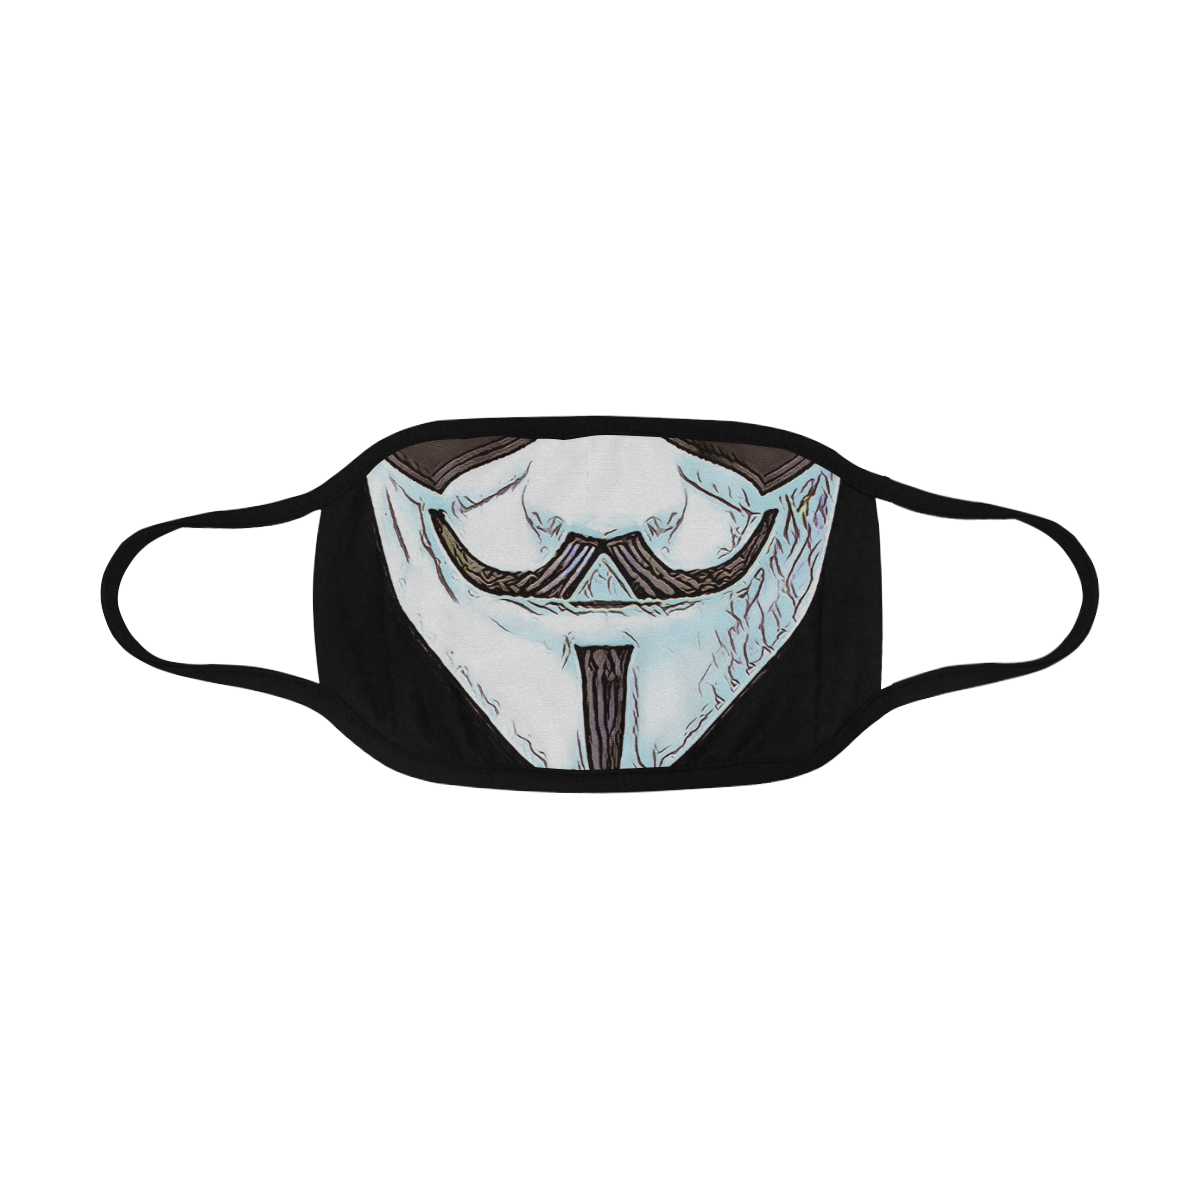 ANONYMUS MASK Mouth Mask